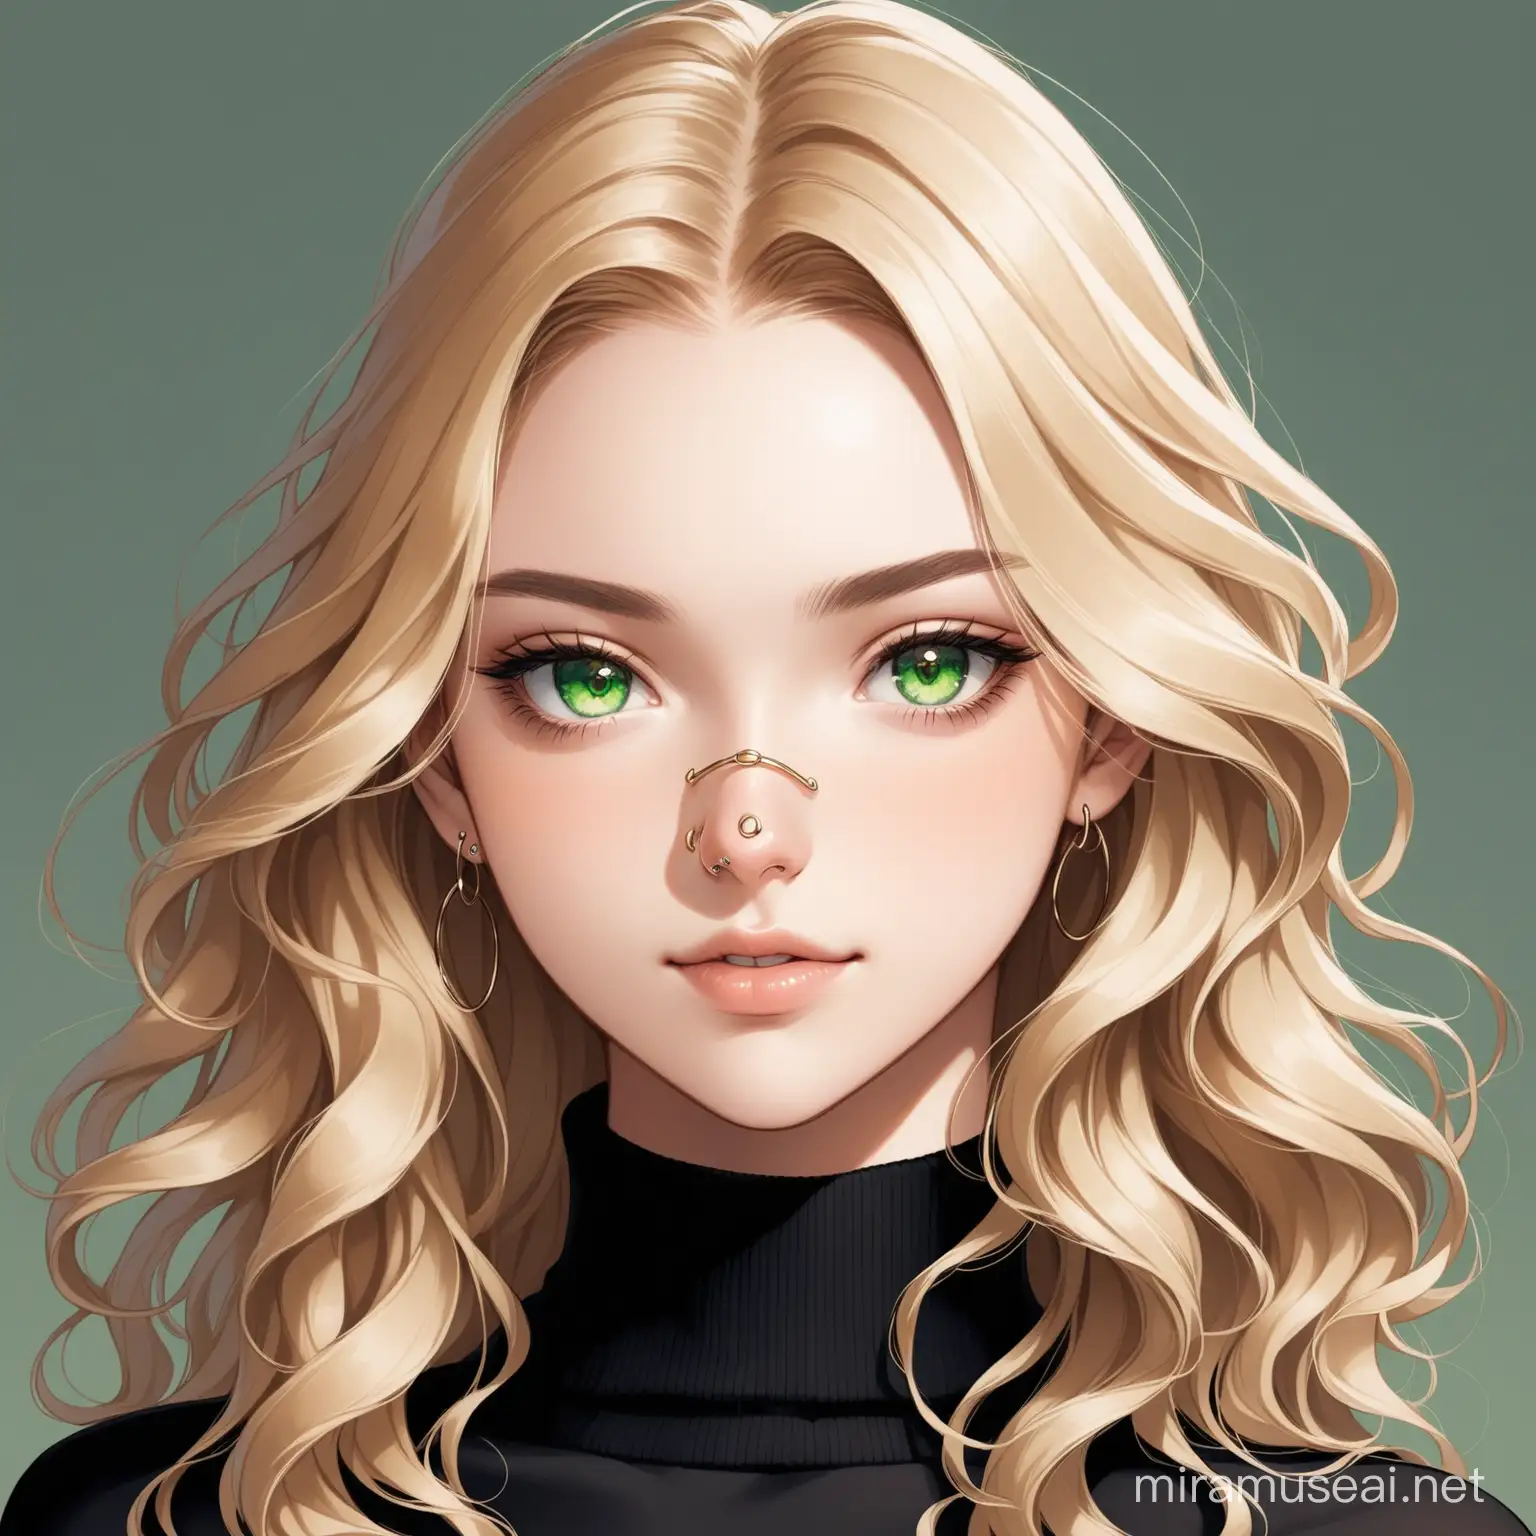 Blonde Woman with Nose Ring in Black Turtleneck on Plain Background